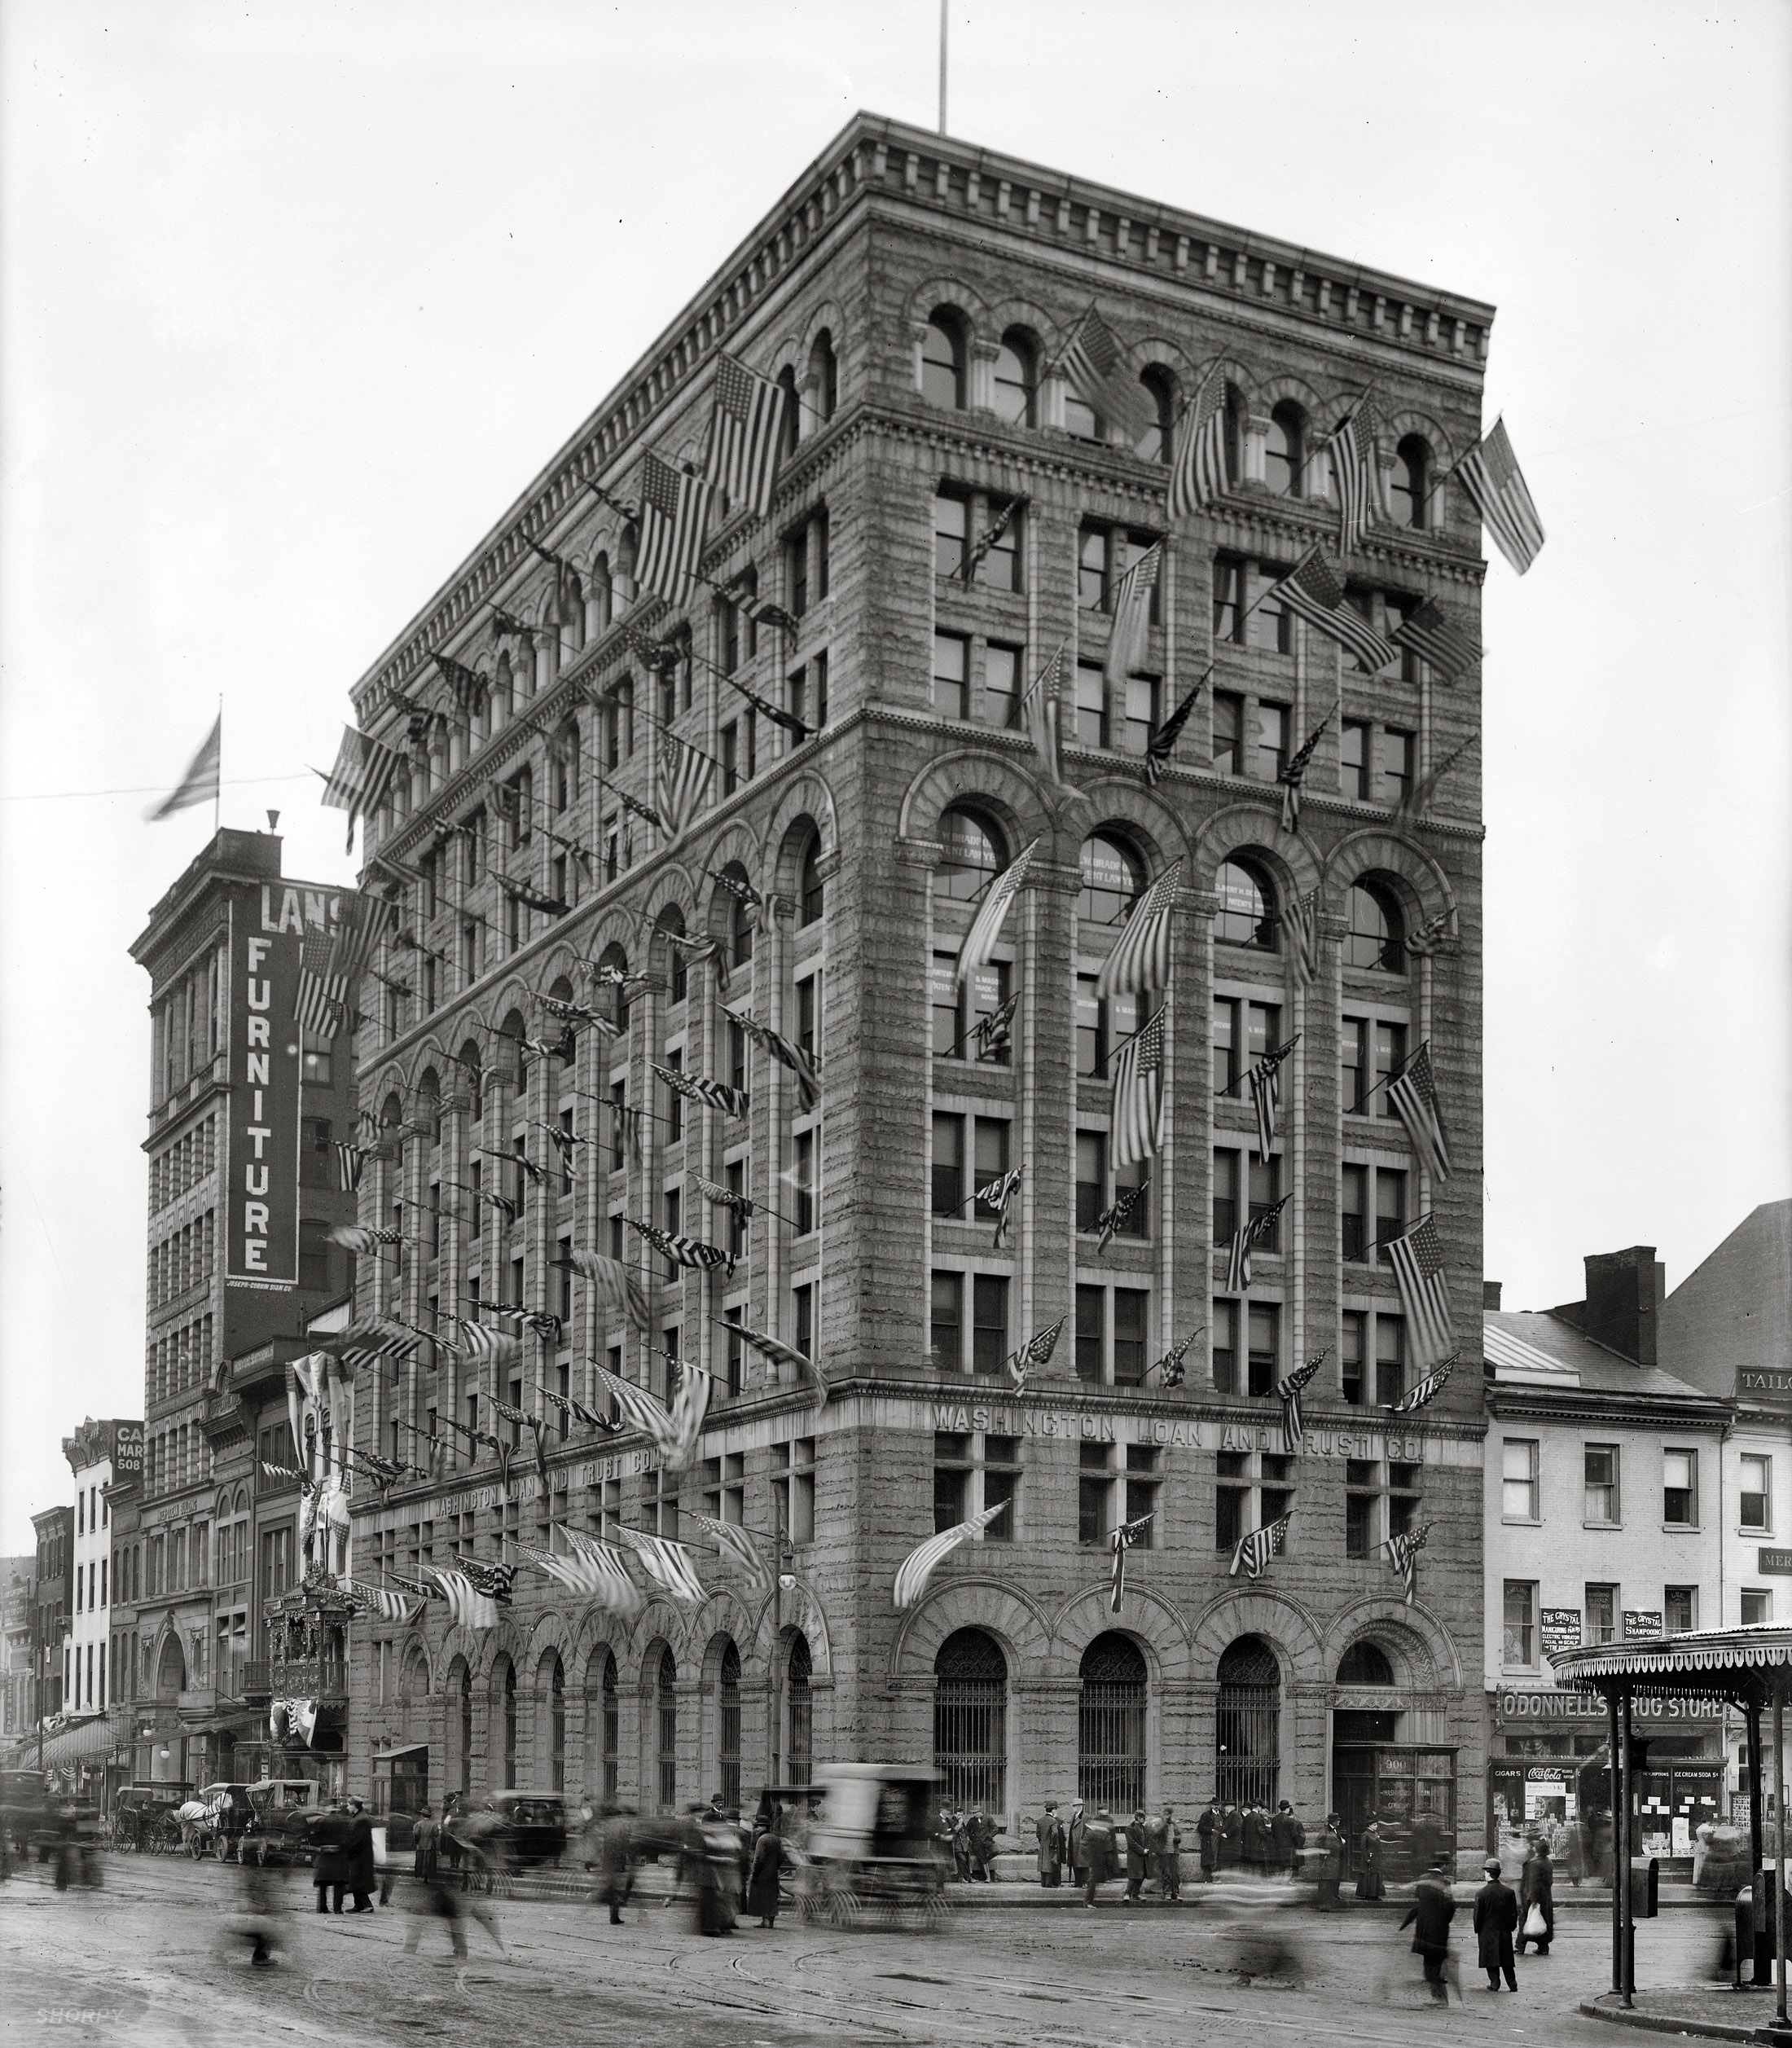 "District of Columbia. Washington Loan & Trust building." A street scene circa 1907, possibly on Flag Day. National Photo glass negative. View full size.